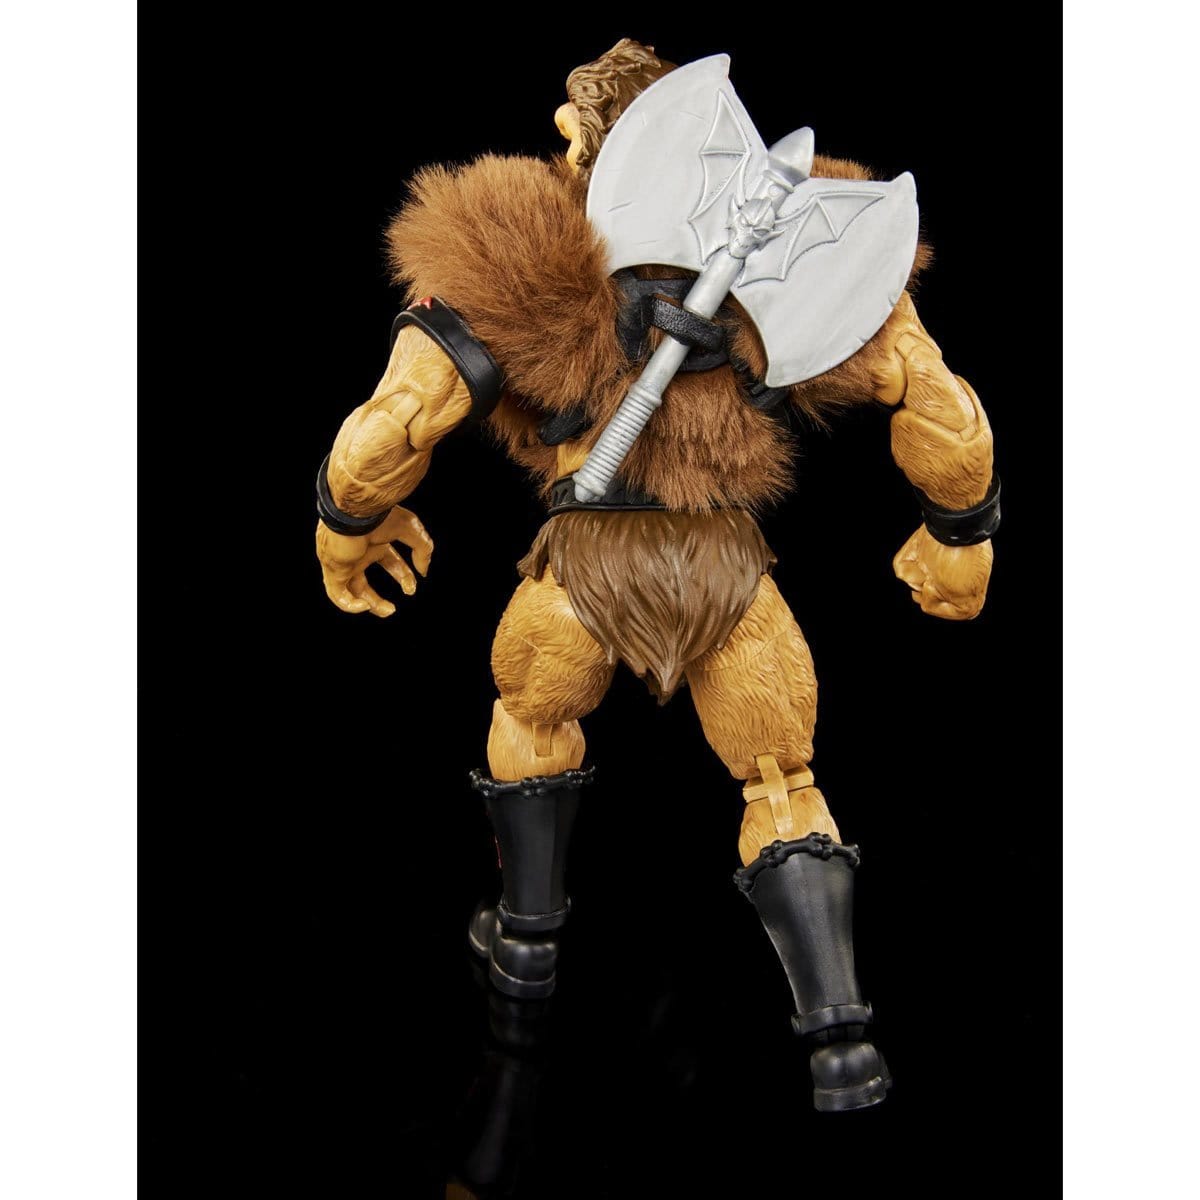 Horde Grizzlor Masters of the Universe Masterverse Princess of Power Action Figure - Pop-O-Loco - Mattel